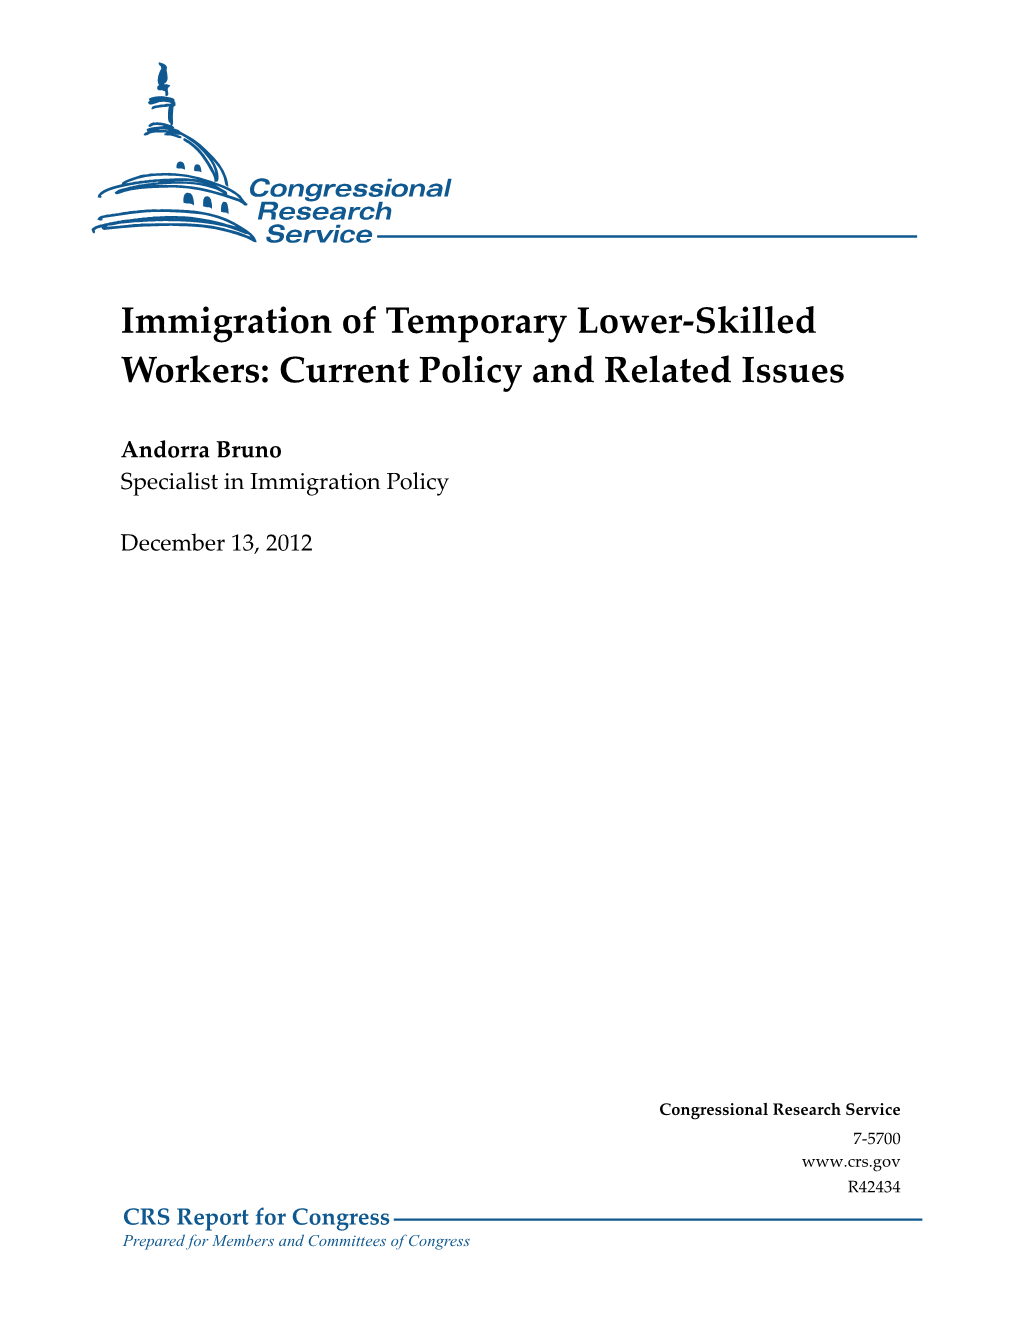 Immigration of Temporary Lower-Skilled Workers: Current Policy and Related Issues